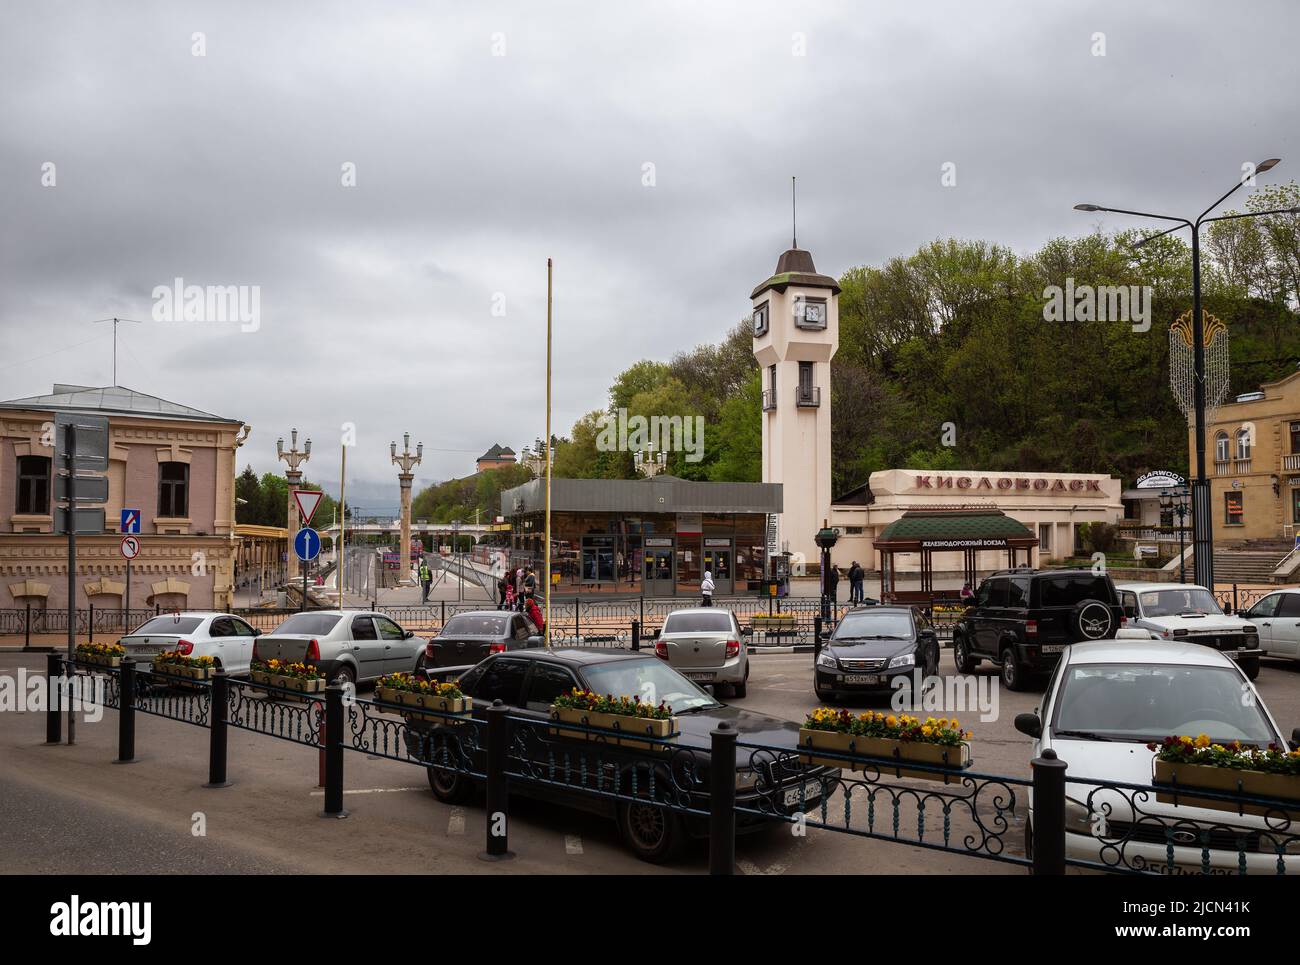 Kislovodsk, Russia - May 08, 2022: Railway station and station square with car parking and public transport stop Stock Photo